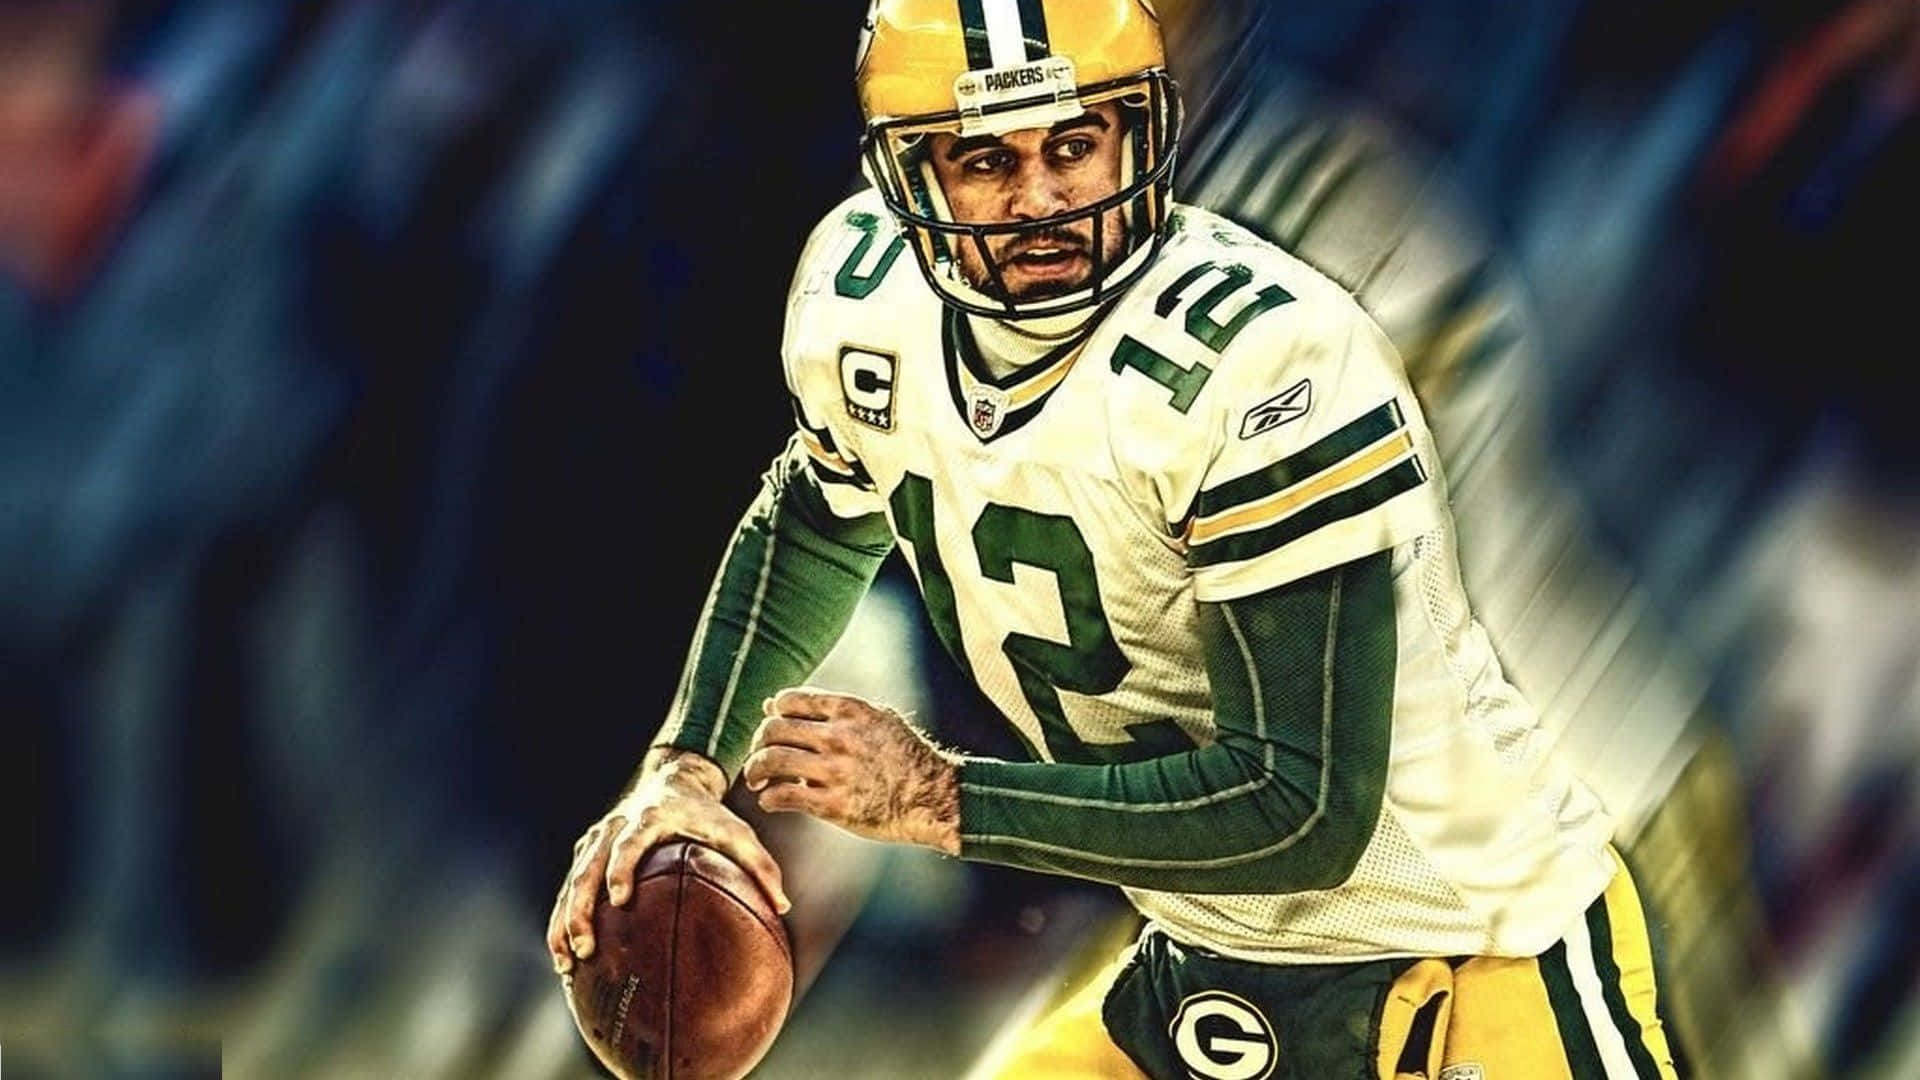 Aaron Rodgers - Legendary Quarterback of the Green Bay Packers